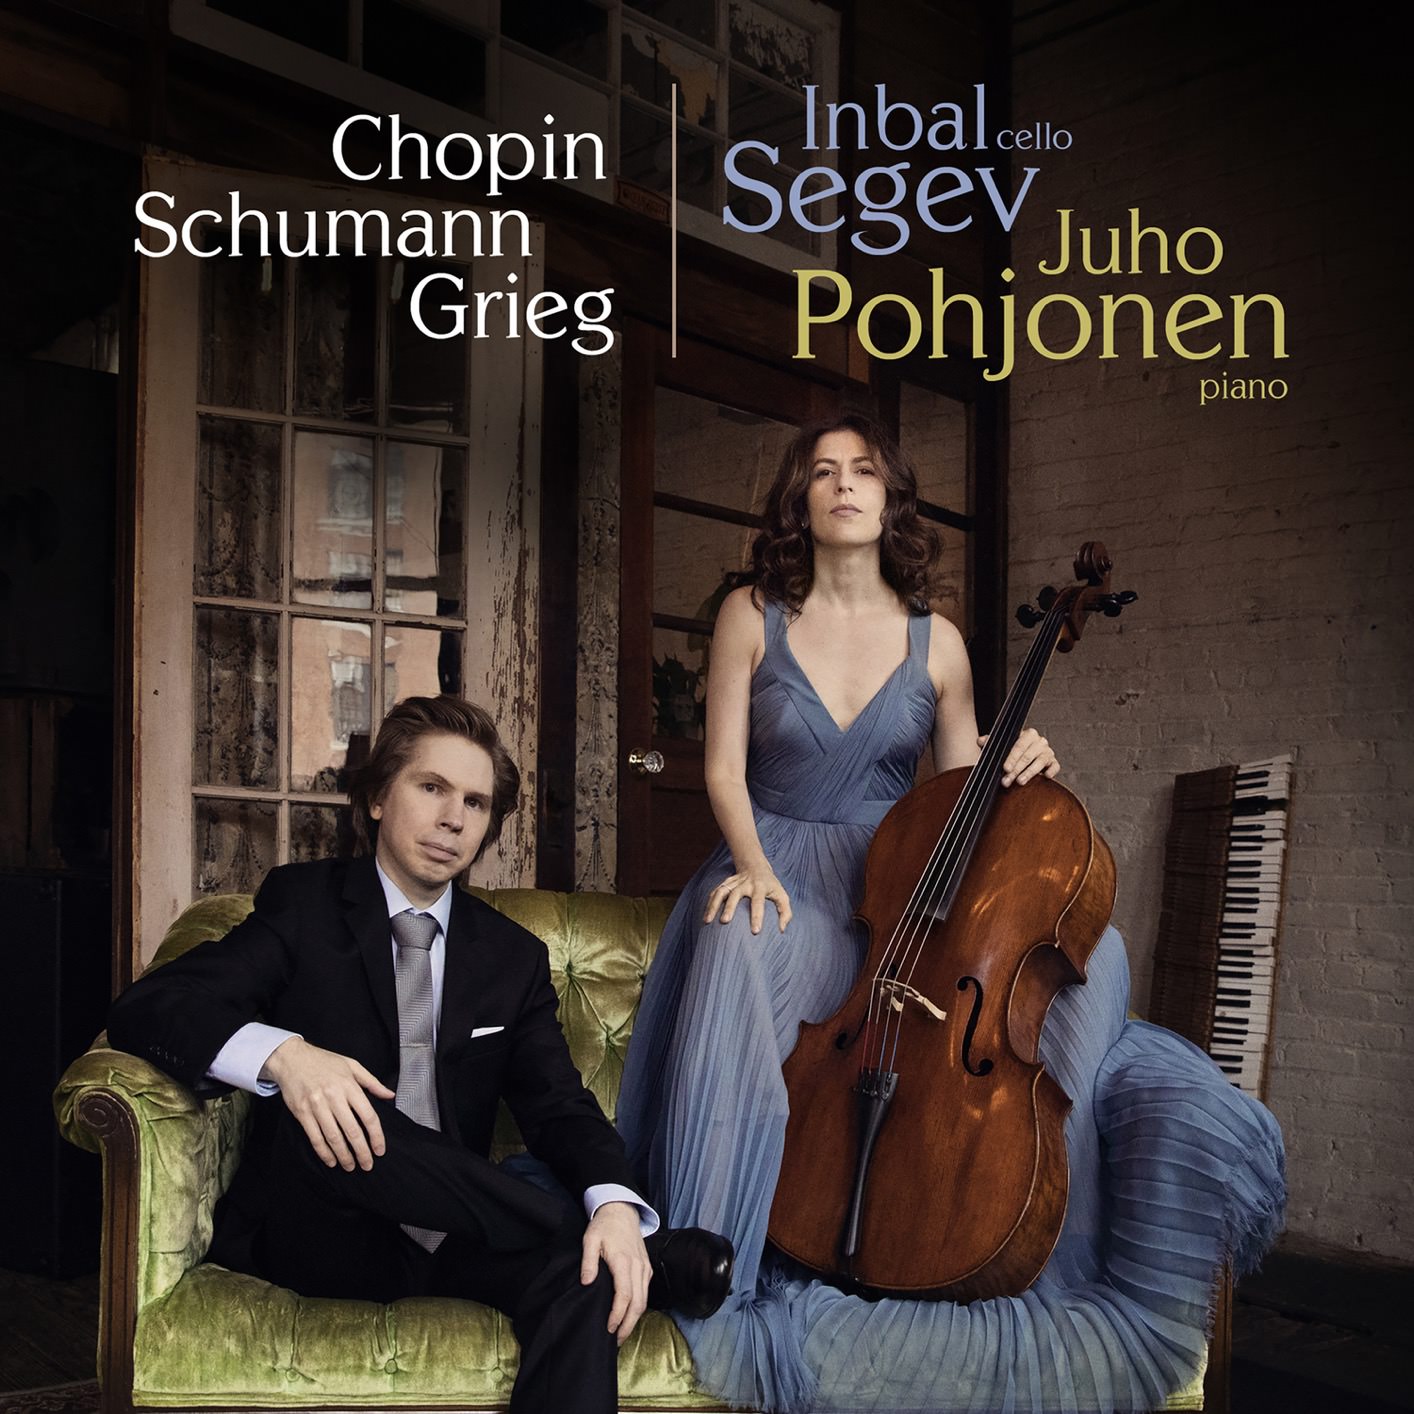 Inbal Segev & Juho Pohjonen - Works for Cello and Piano by Chopin, Schumann and Grieg (2018) [FLAC 24bit/44,1kHz]